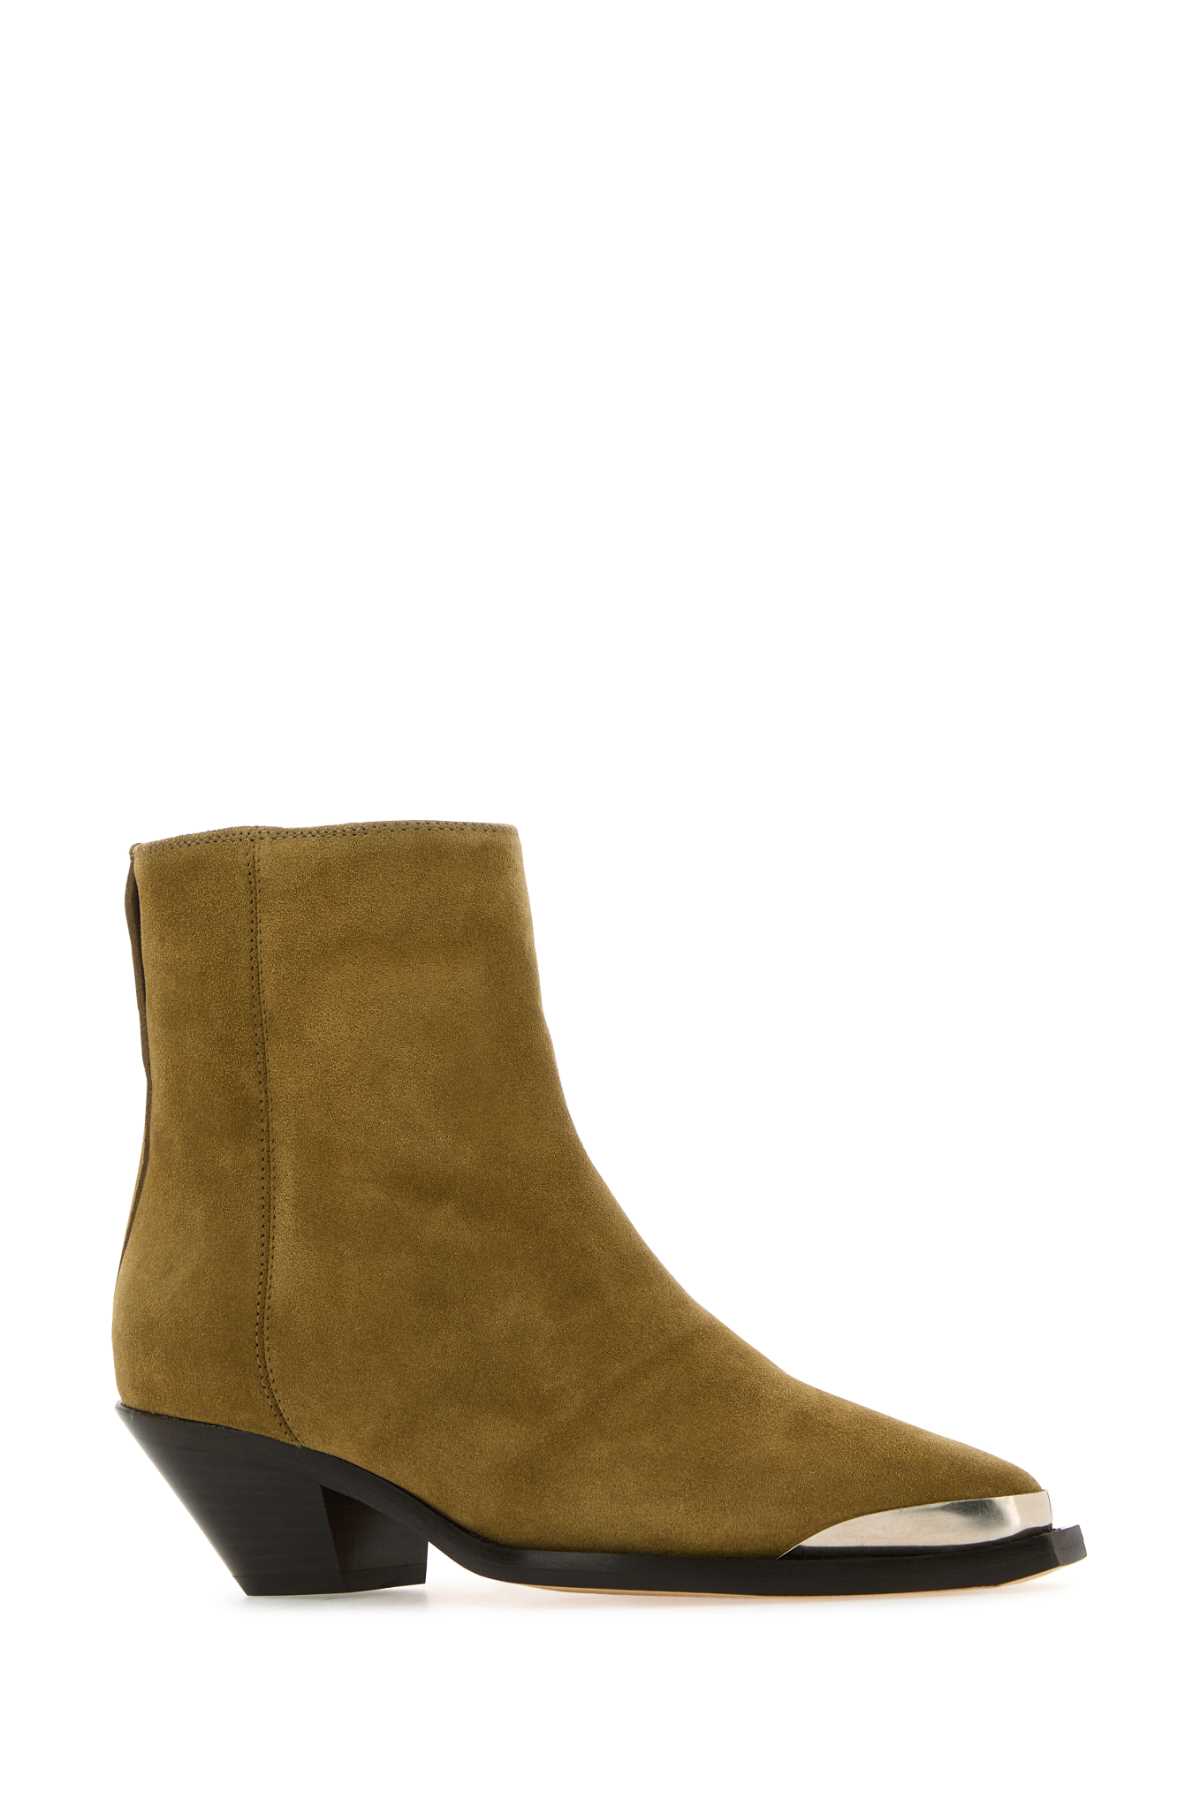 ISABEL MARANT BEIGE SUEDE ADNAE ANKLE BOOTS